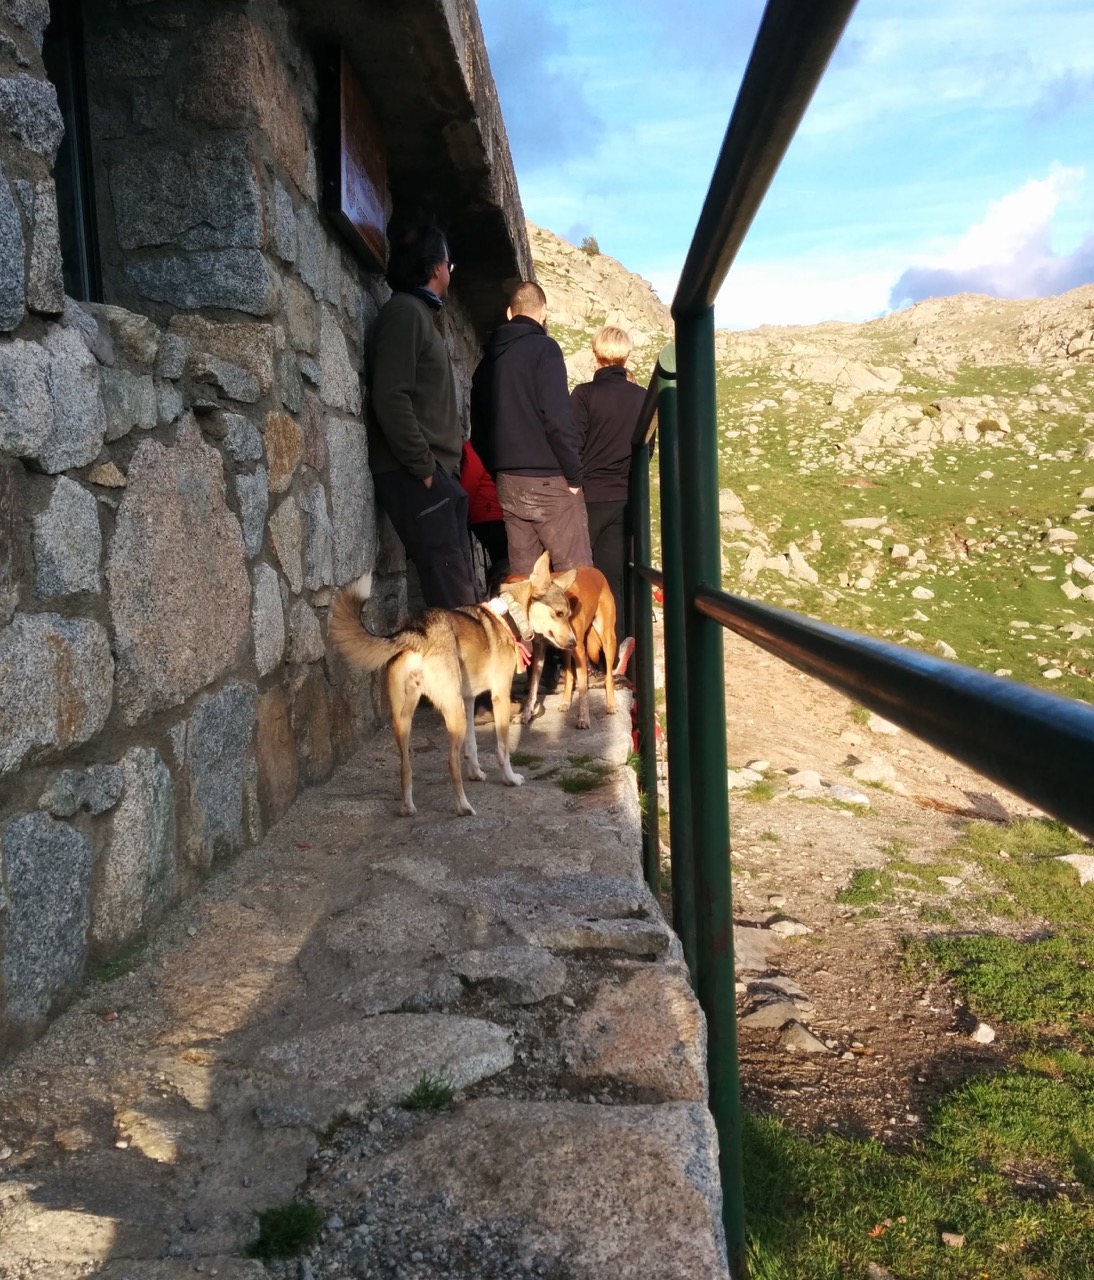 Ran into a Barcelona dog club on their annual retreat, and hung out with ~20 dogs in an alpine setting. Wild! Trippy. Was it a dream?